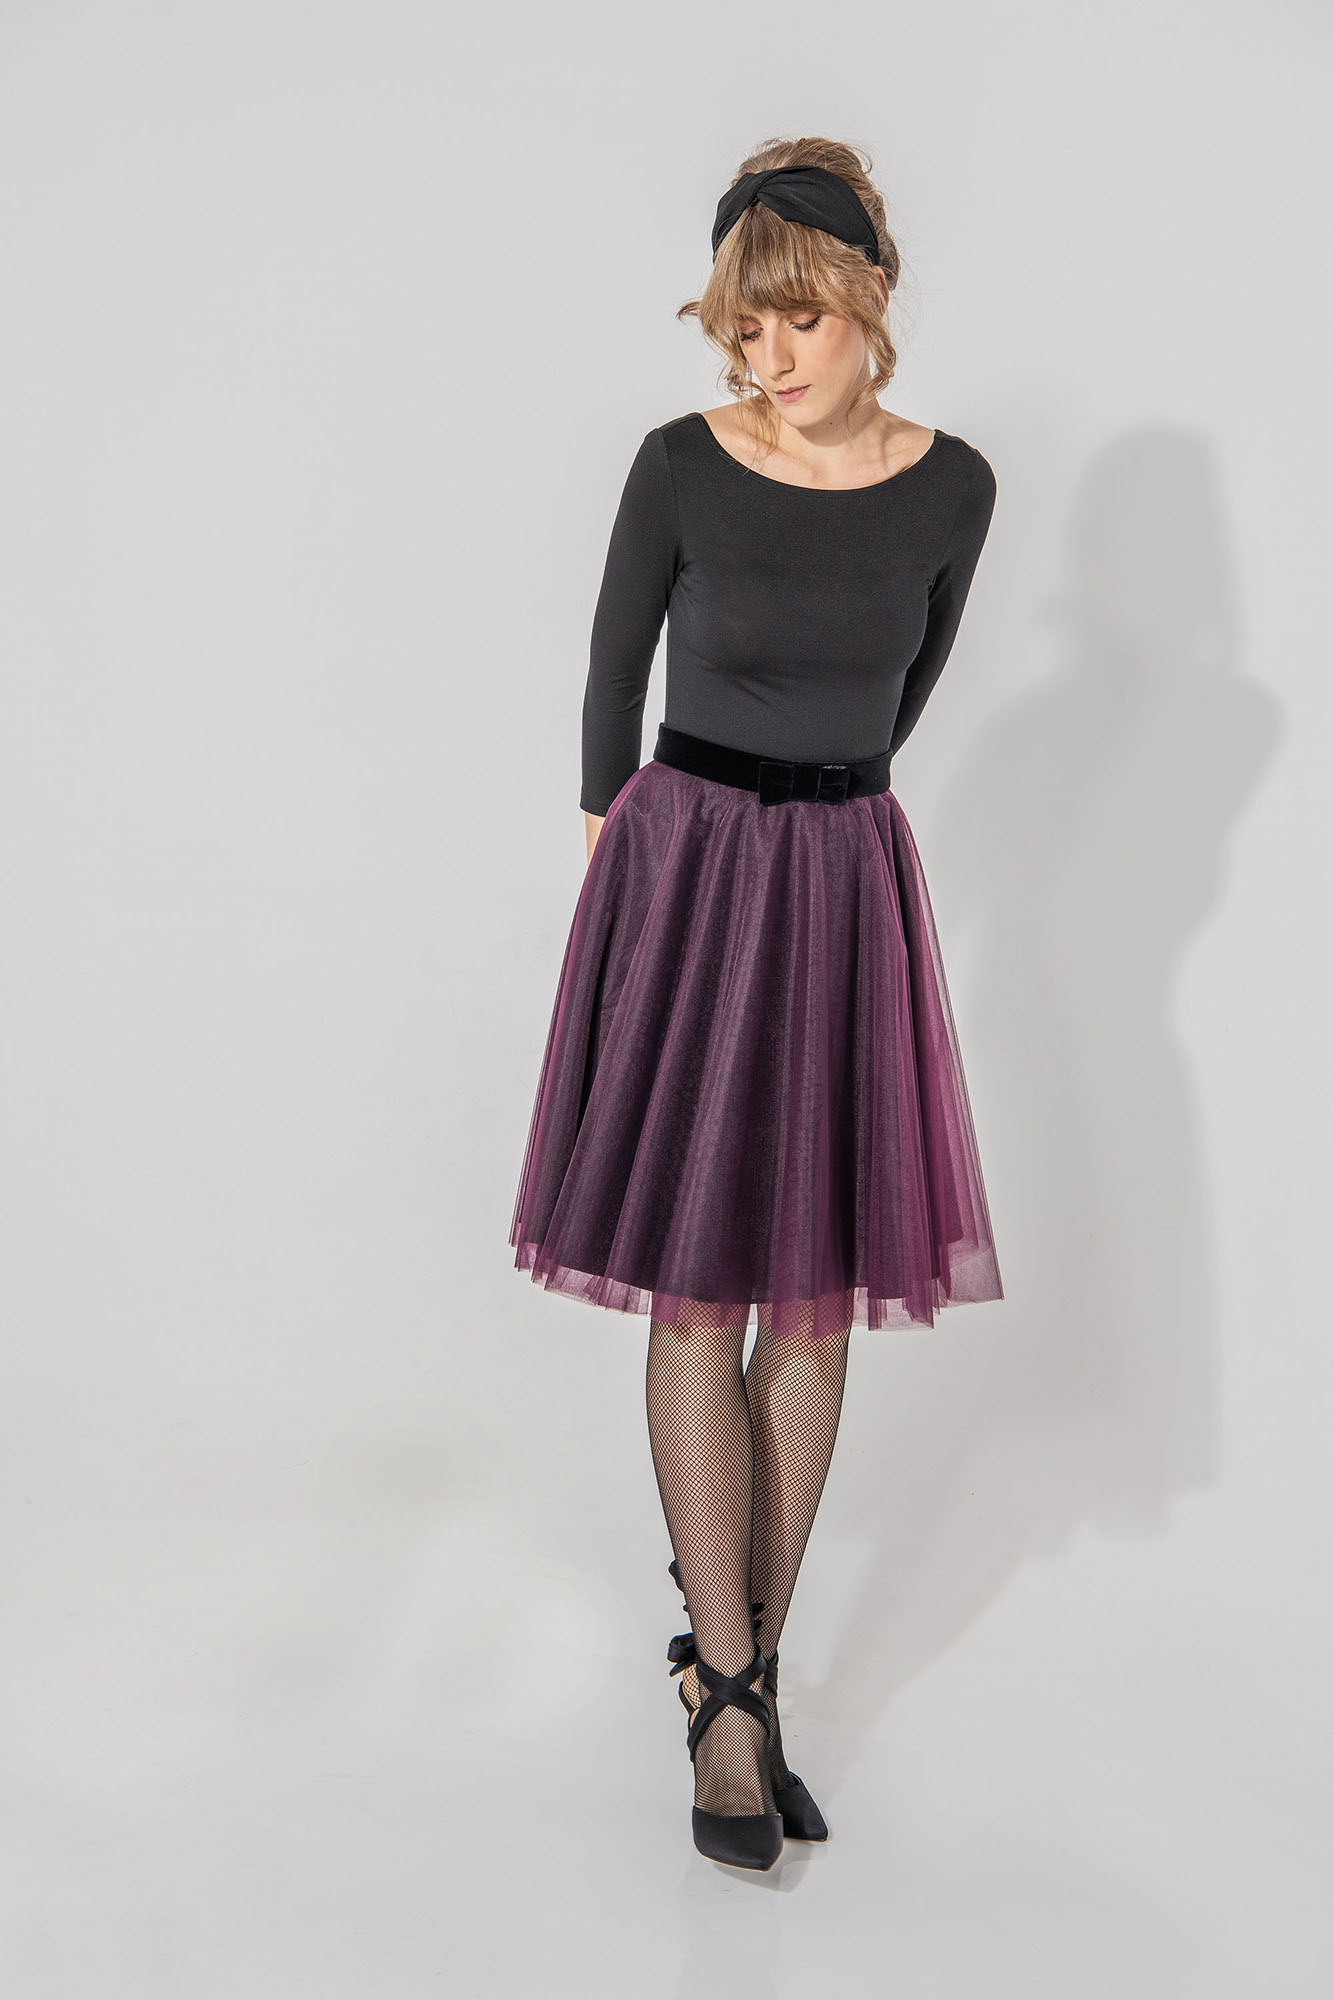 tulle skirt with a bow on the belt in merlot front • Sassa Björg